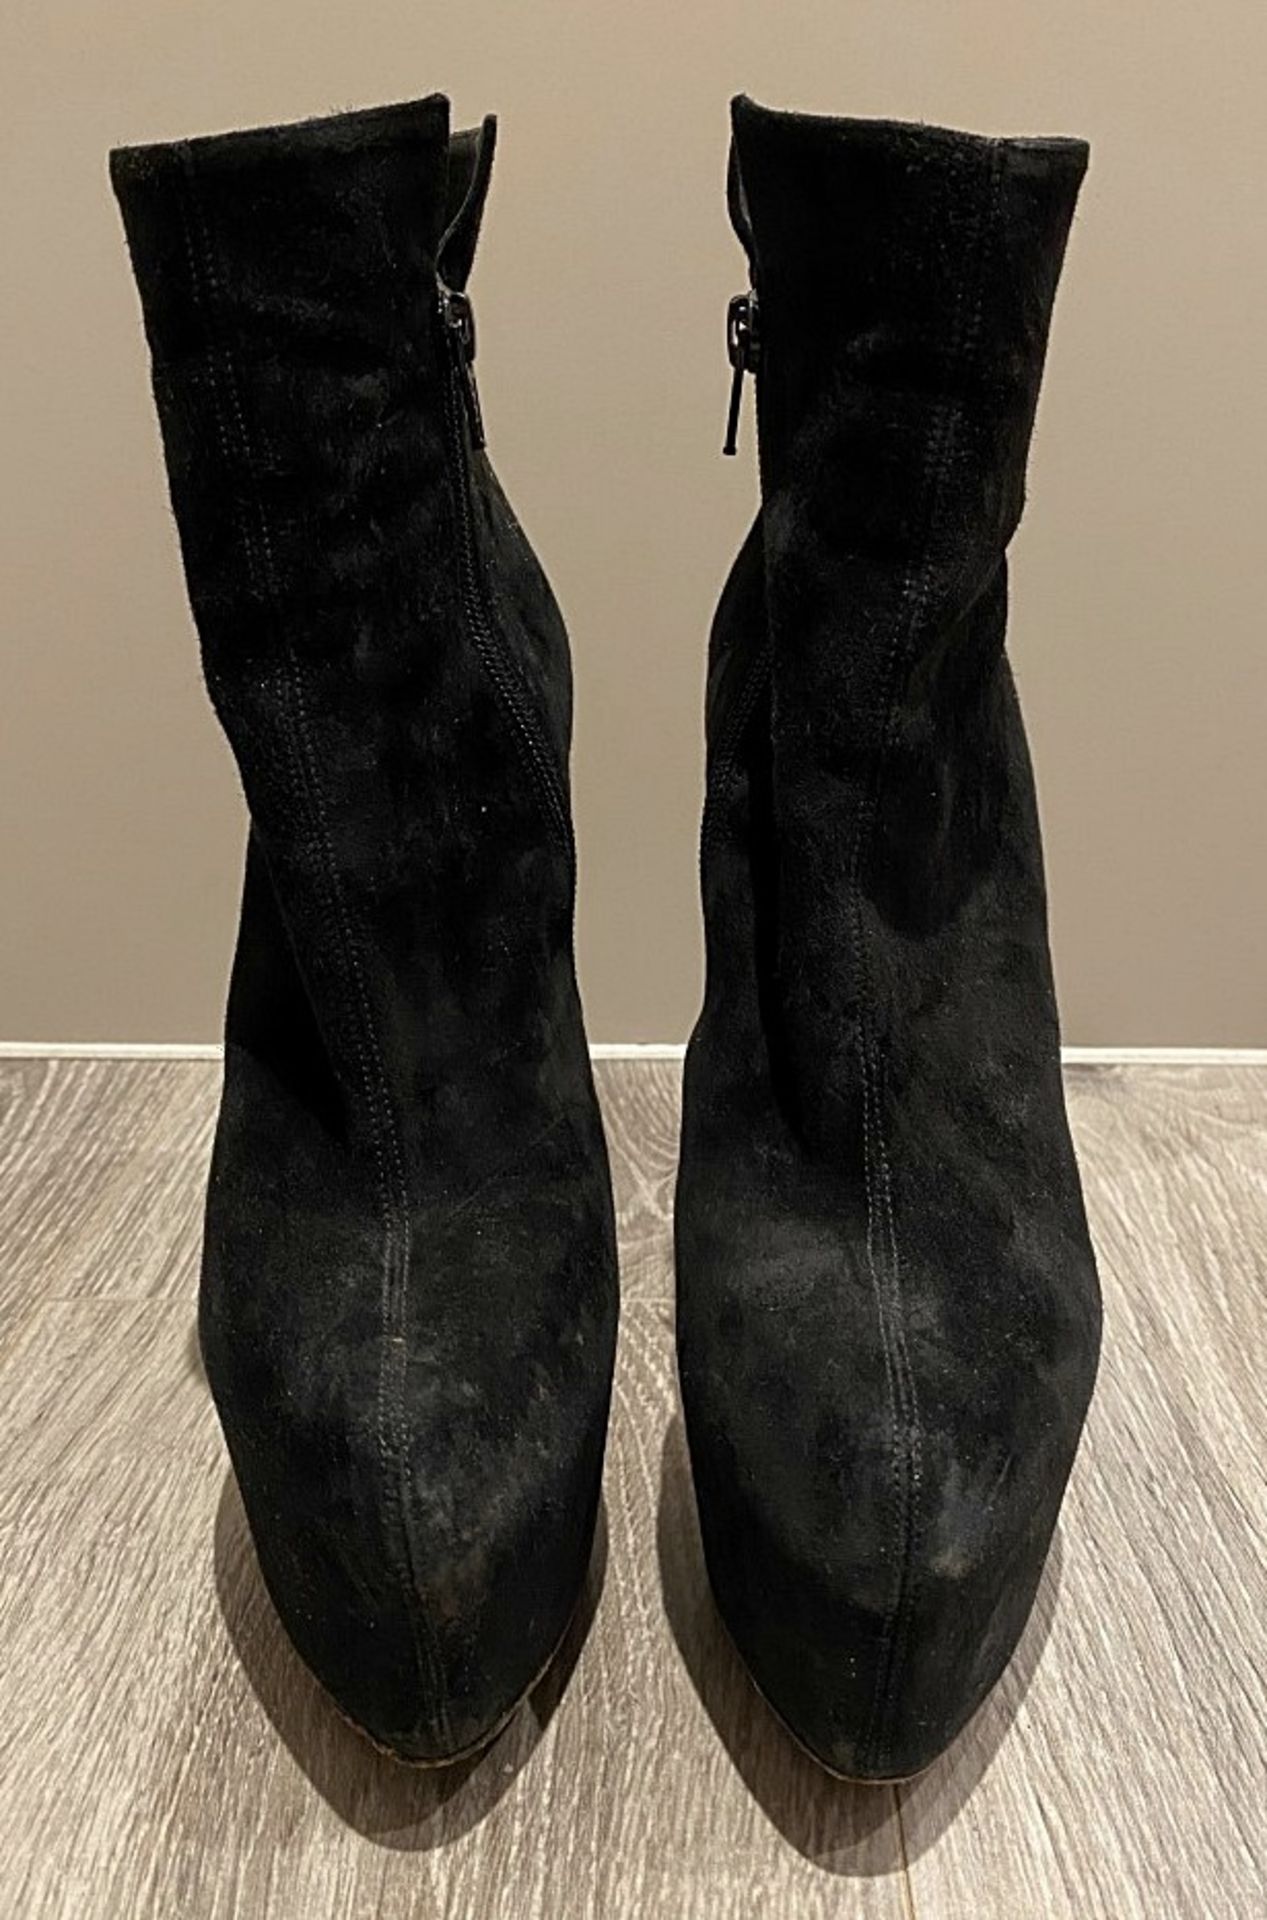 1 x Pair Of Genuine Christain Louboutin Boots In Black - Size: 36.5 - Preowned in Good Condition - R - Image 4 of 4